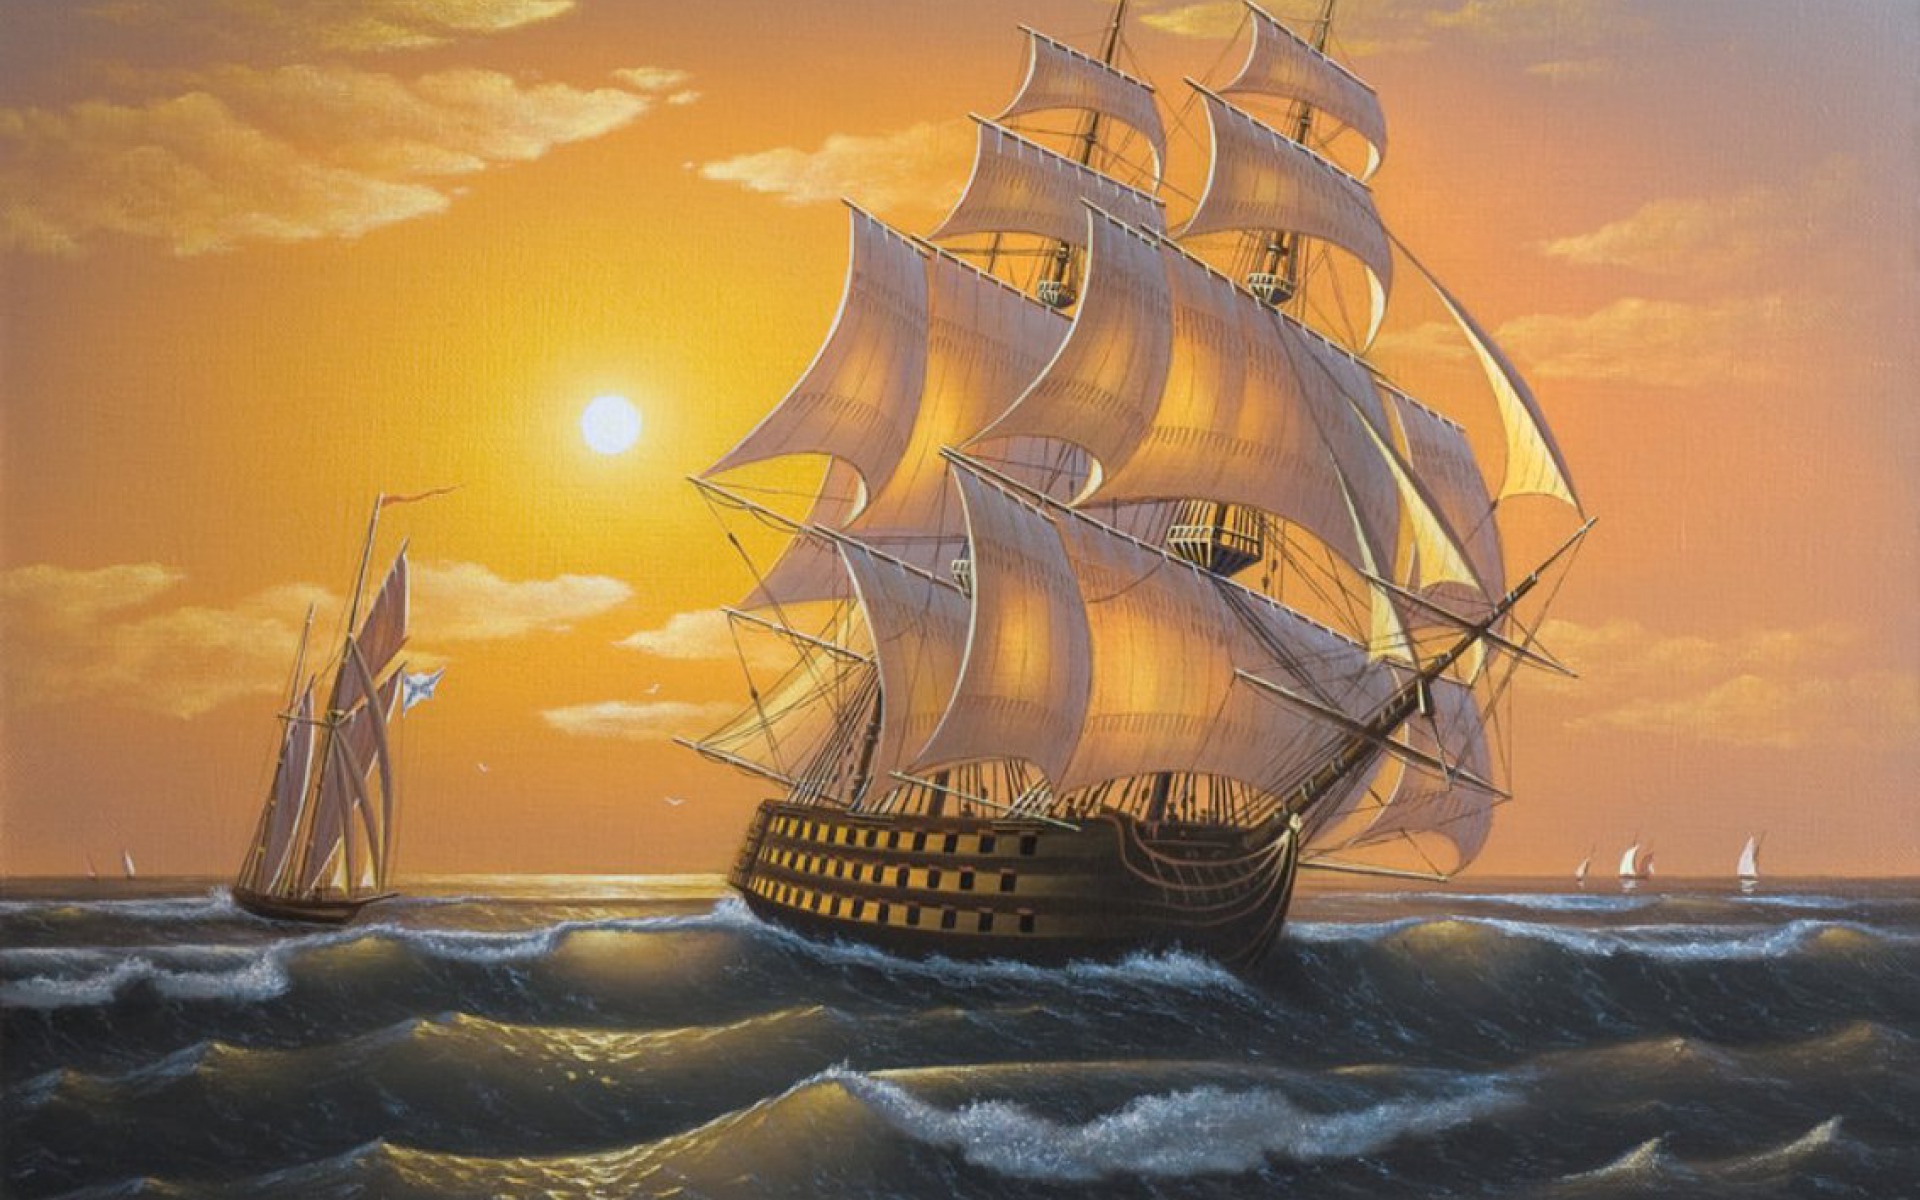 wallpaper images photo,sailing ship,first rate,fluyt,manila galleon,east indiaman